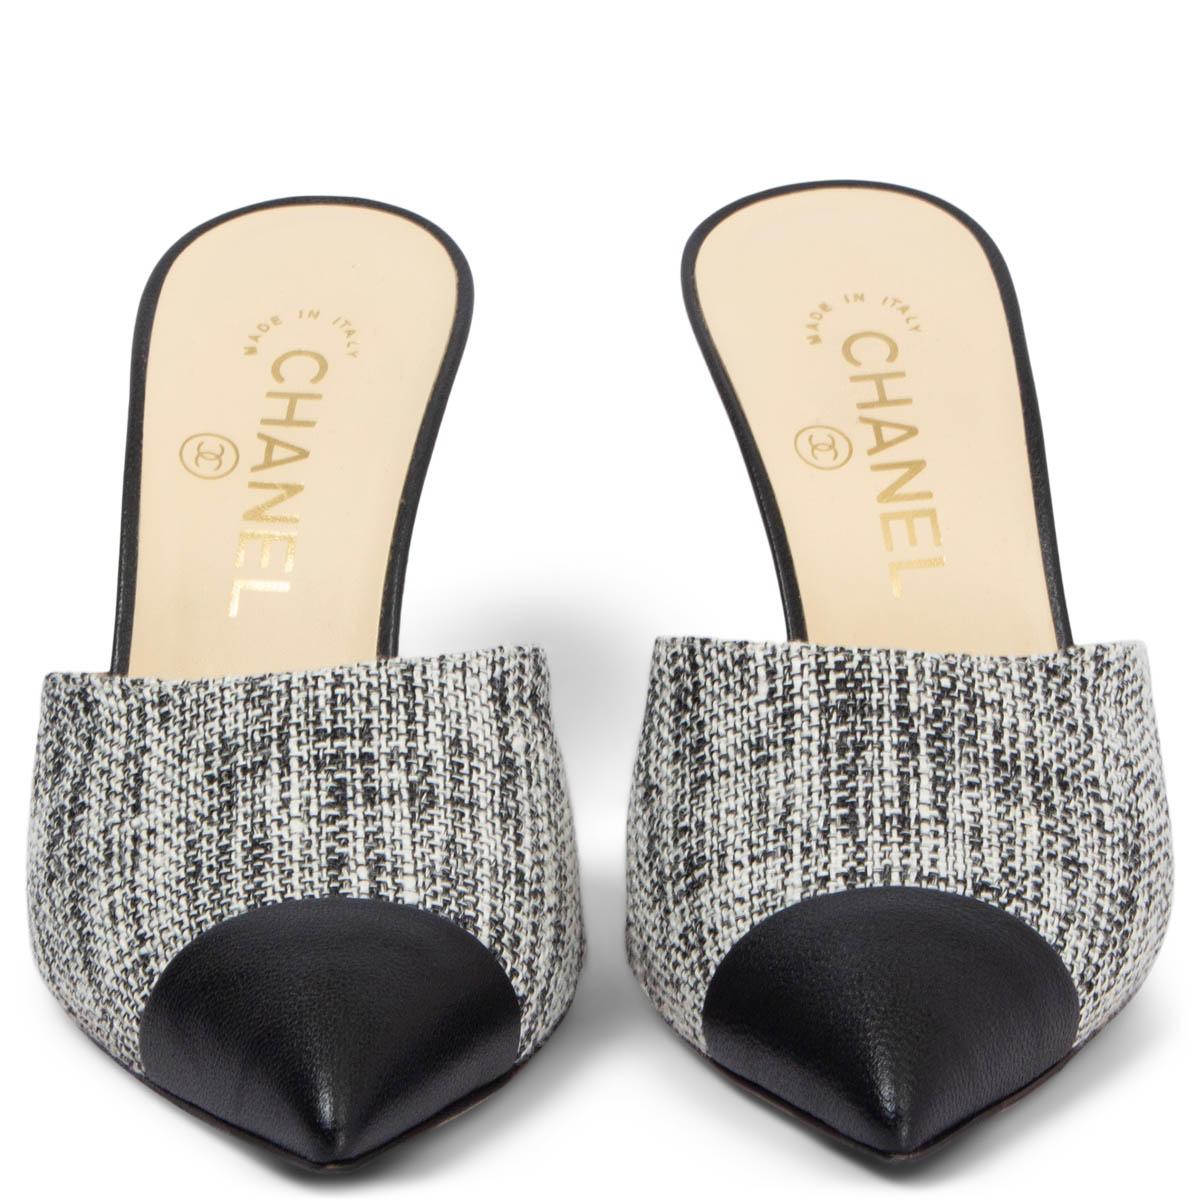 100% authentic Chanel pointed-toe mules in black, grey and white tweed with black goatskin cap toe and heel embellished with an off-white faux pearl. Have been worn once or twice and show a very faint dent on the left heel. (barley visible). Come